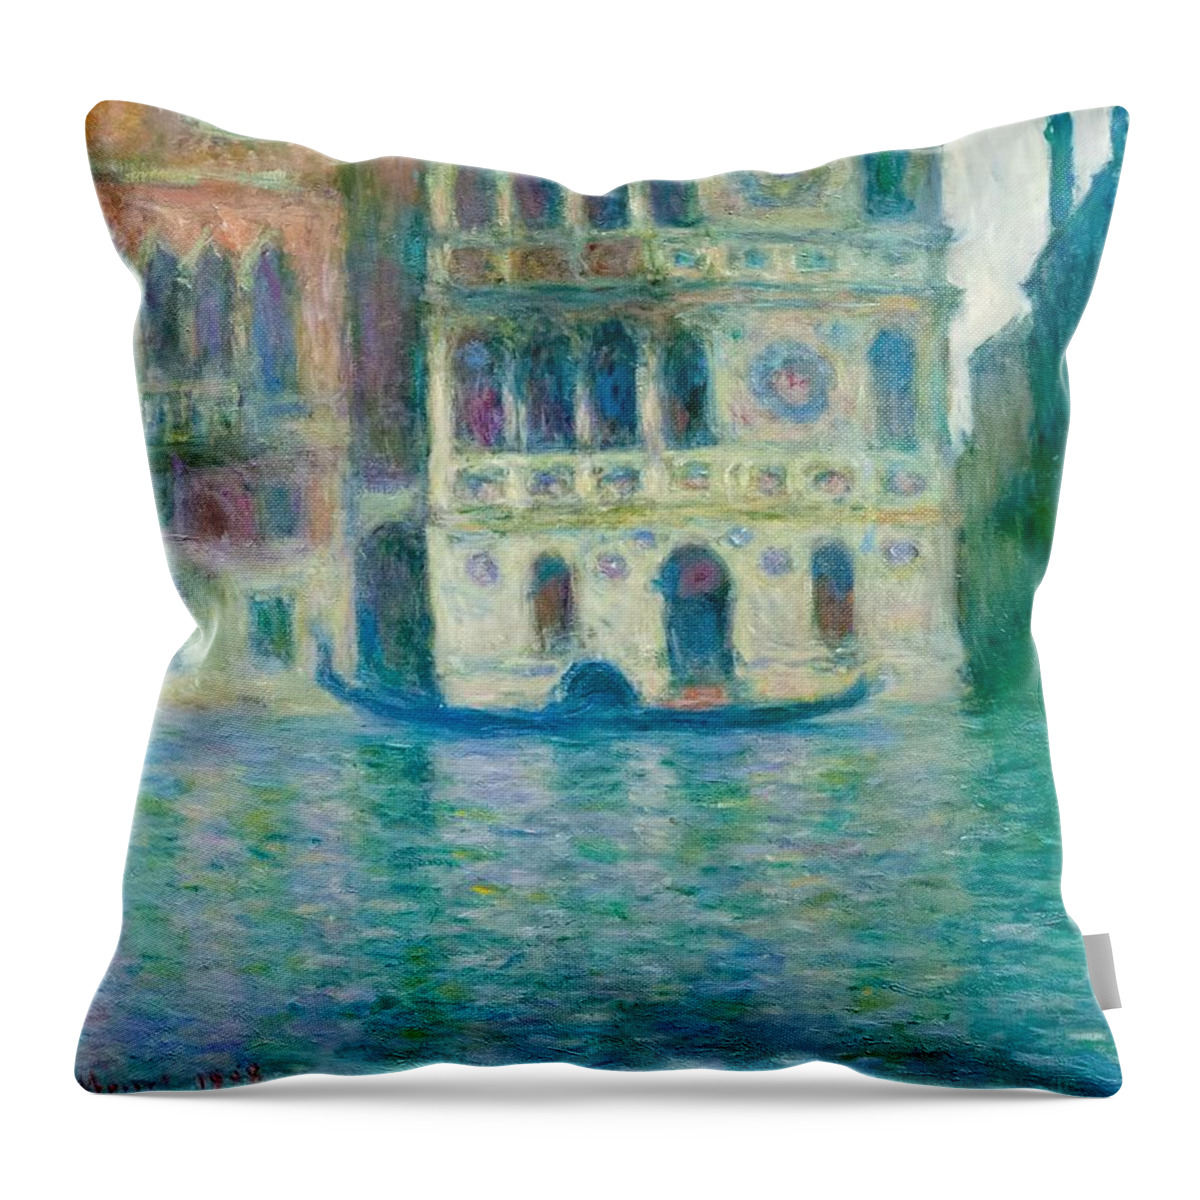 1908 Throw Pillow featuring the painting The Palazzo Dario - Venice by Claude Monet